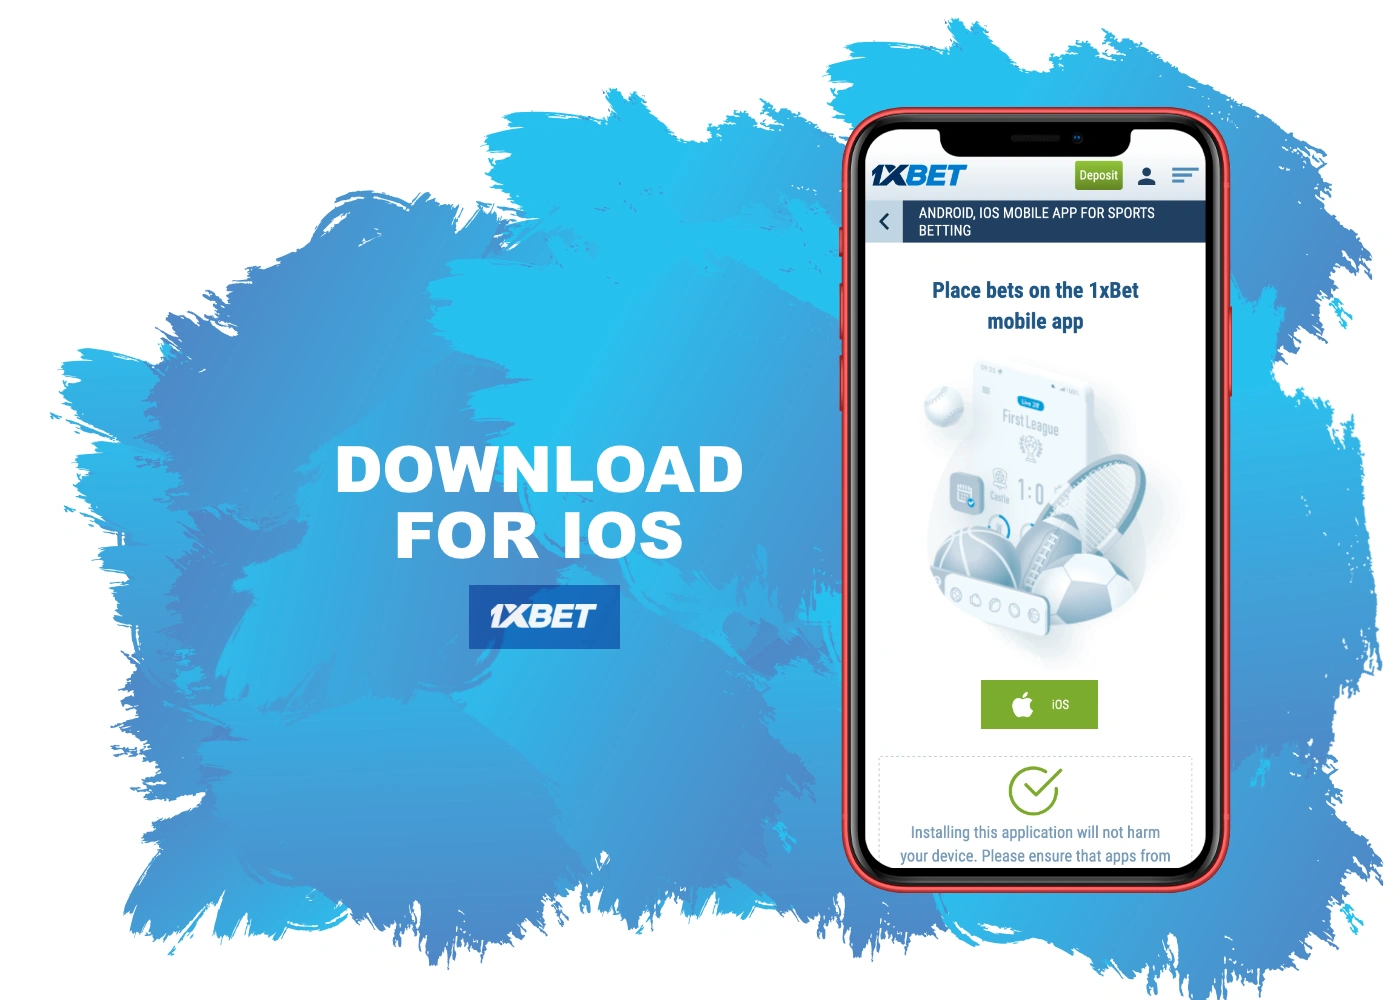 Detailed guide on how to download and install 1xbet application on iphone and ipad